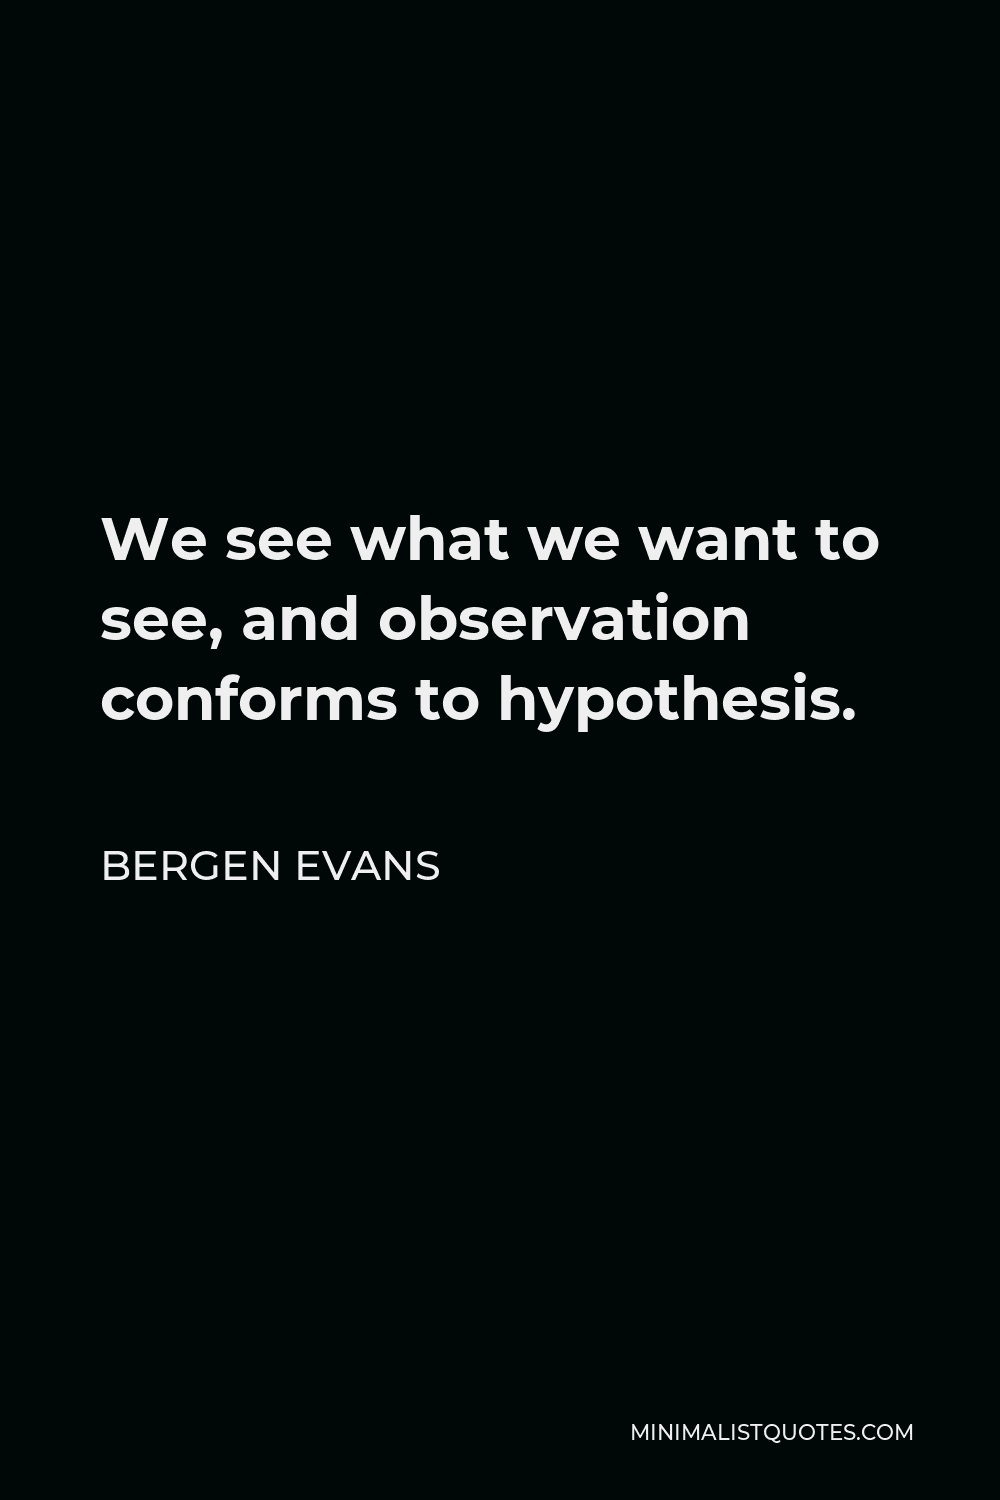 Bergen Evans Quote - We see what we want to see, and observation conforms to hypothesis.